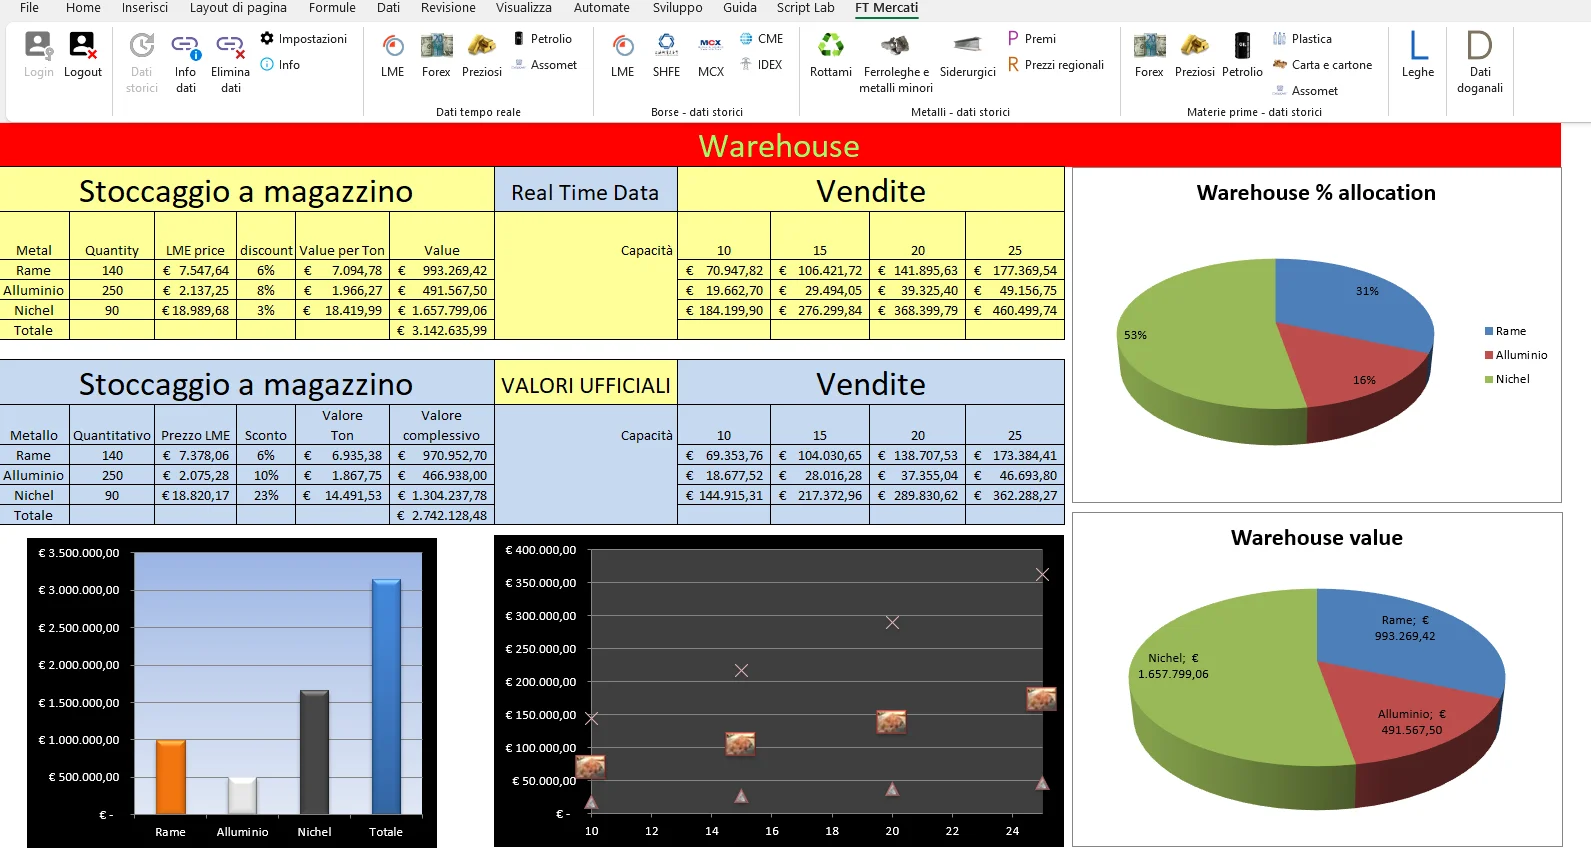 Download Excel Raw Material Market Data